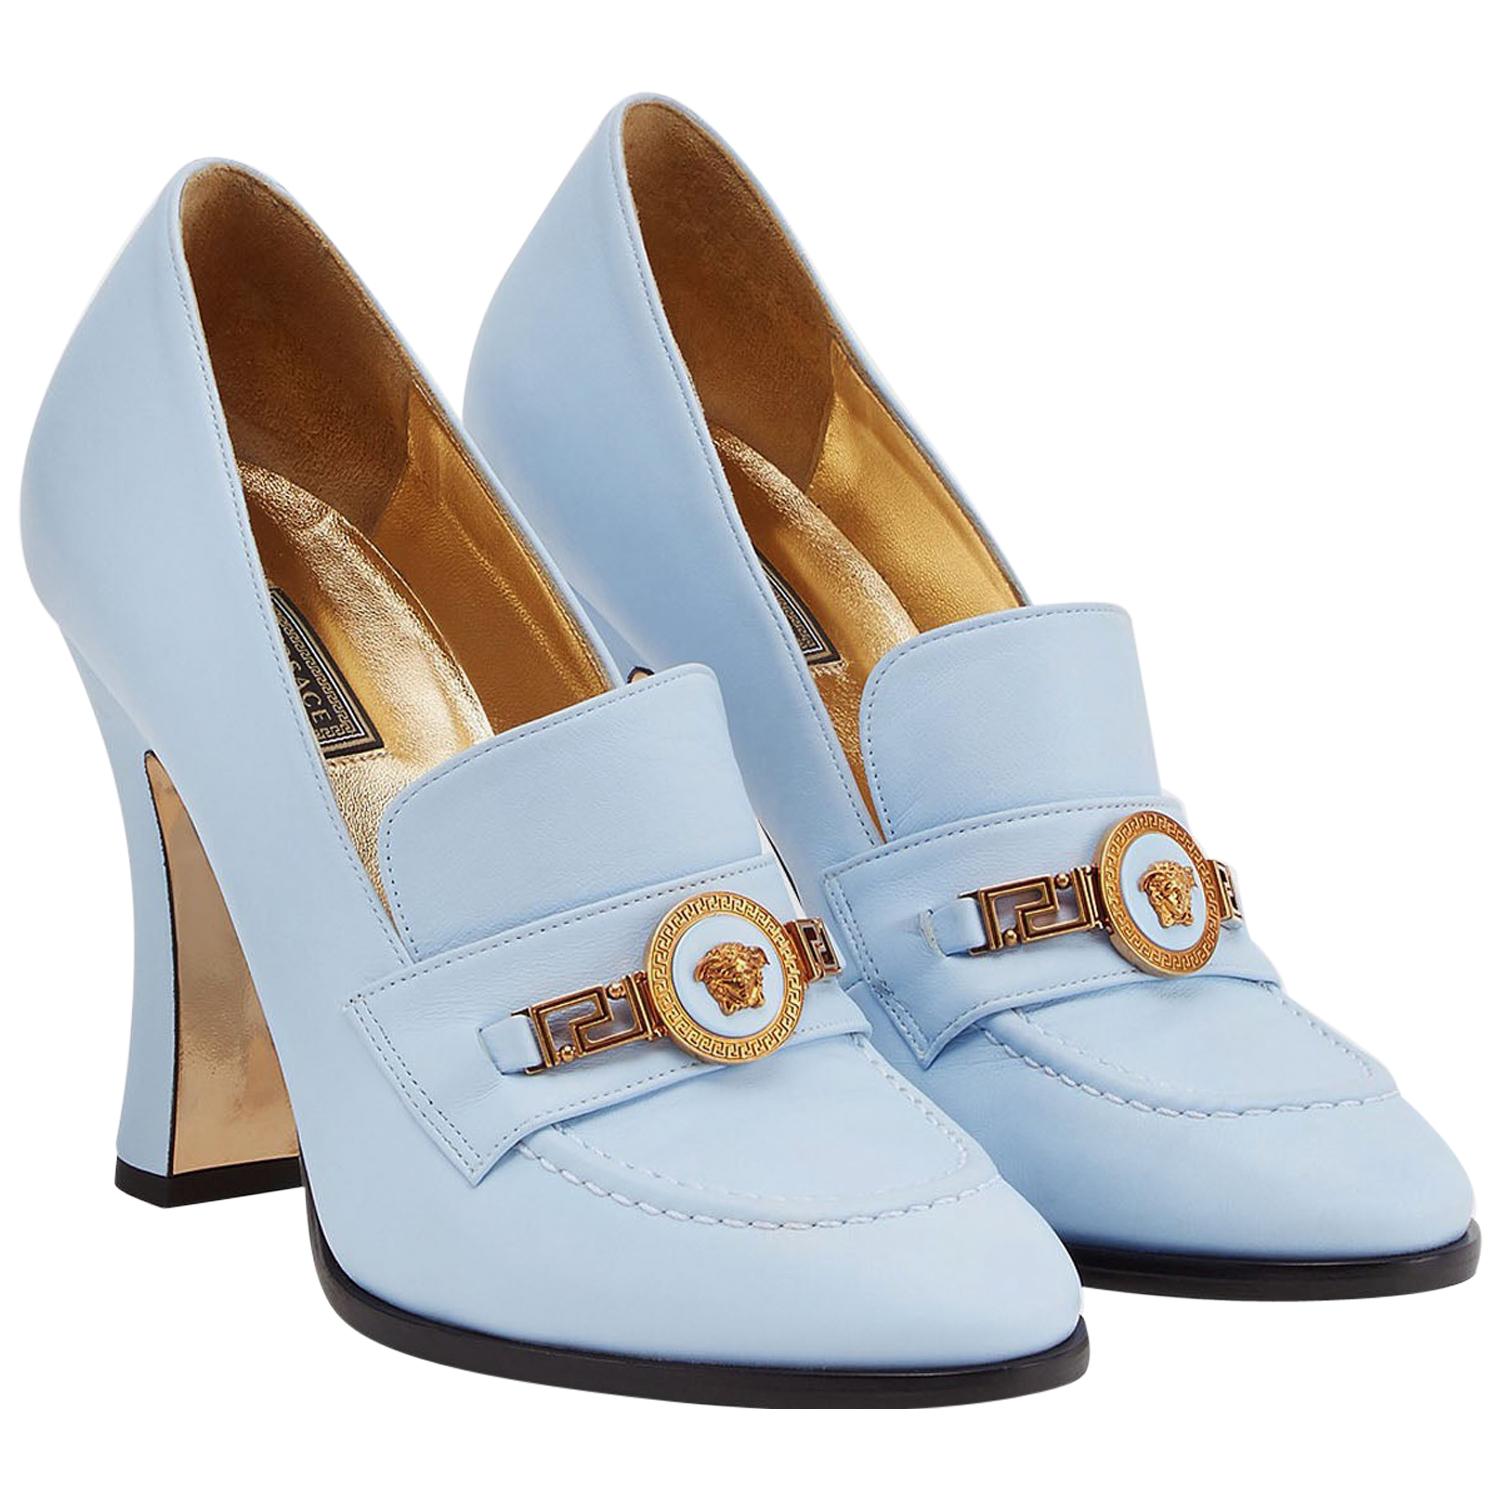 New Versace Runway S/S 2018 Baby Blue Lamb Leather Medusa Pumps Shoes 38 + 37.5